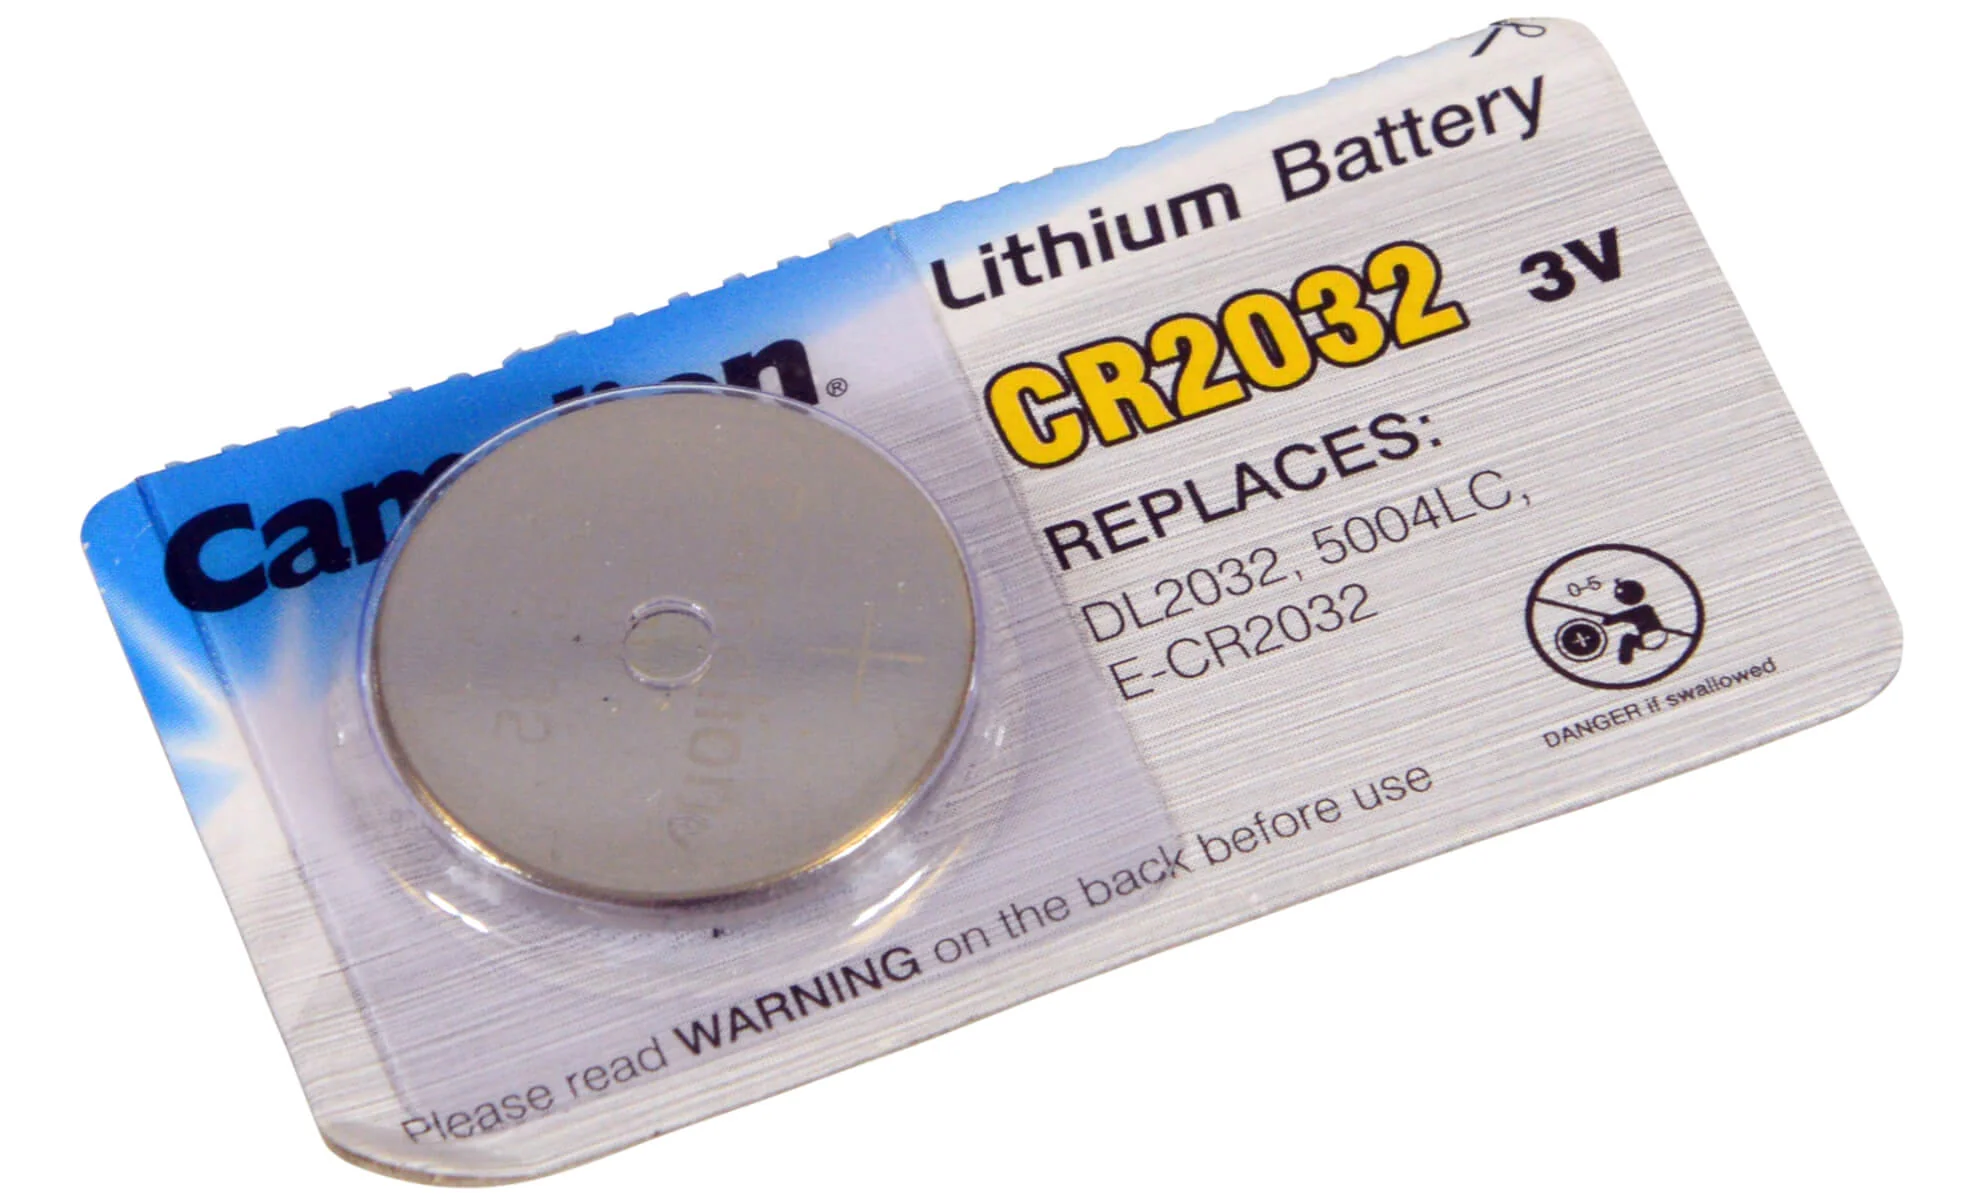 CR2032 Battery, #1 Trusted Battery Brand